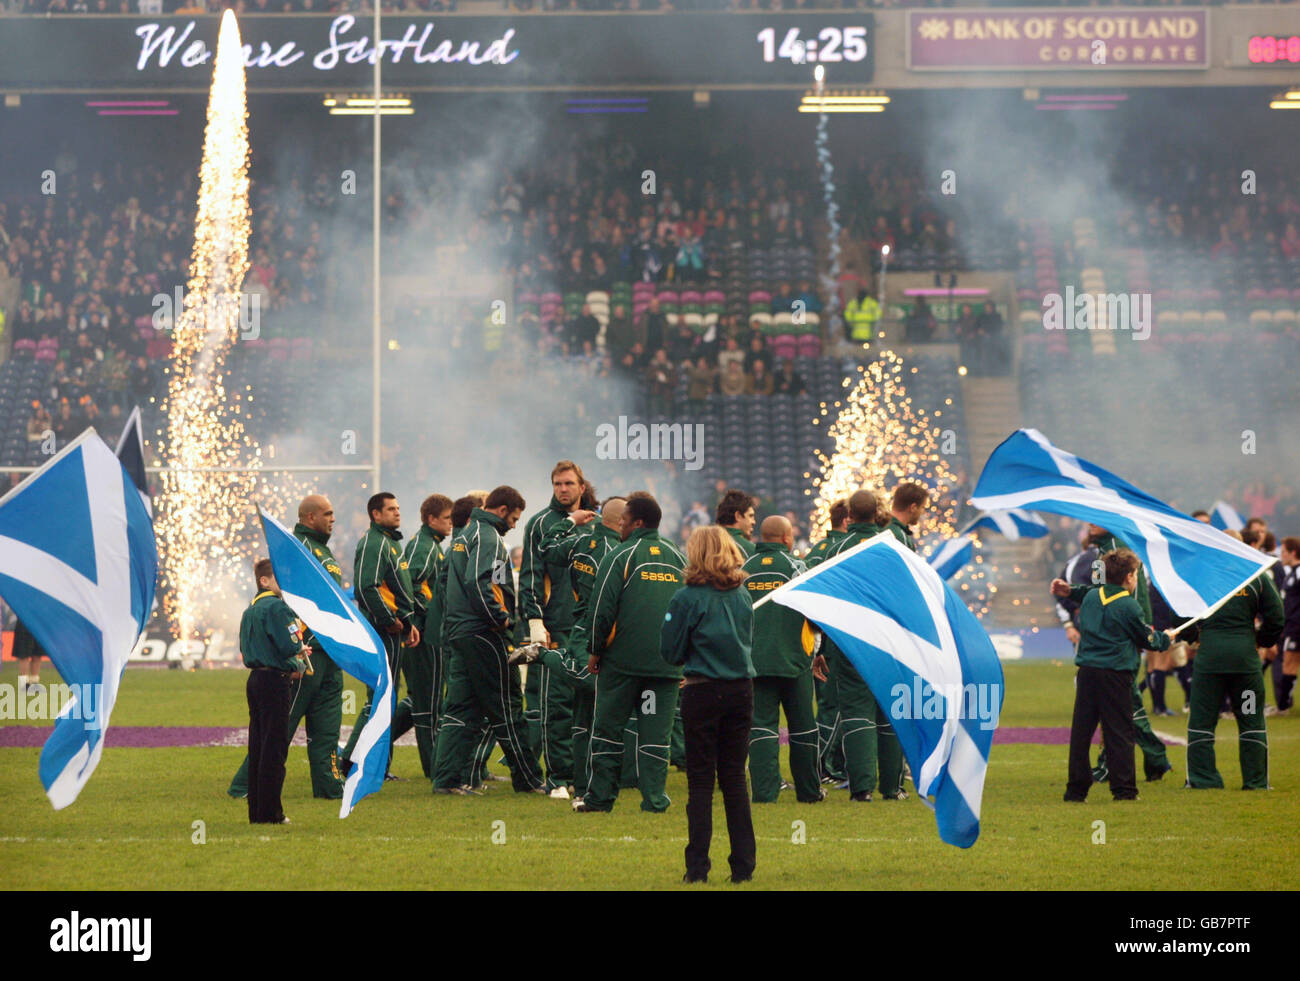 Rugby Union - 2008 Bank Of Scotland Corporate Autumn Test - Scotland v South Africa - Murrayfield. Flags are waved as the South Africa team gather on the pitch ahead of the International match at Murrayfield, Edinburgh. Stock Photo